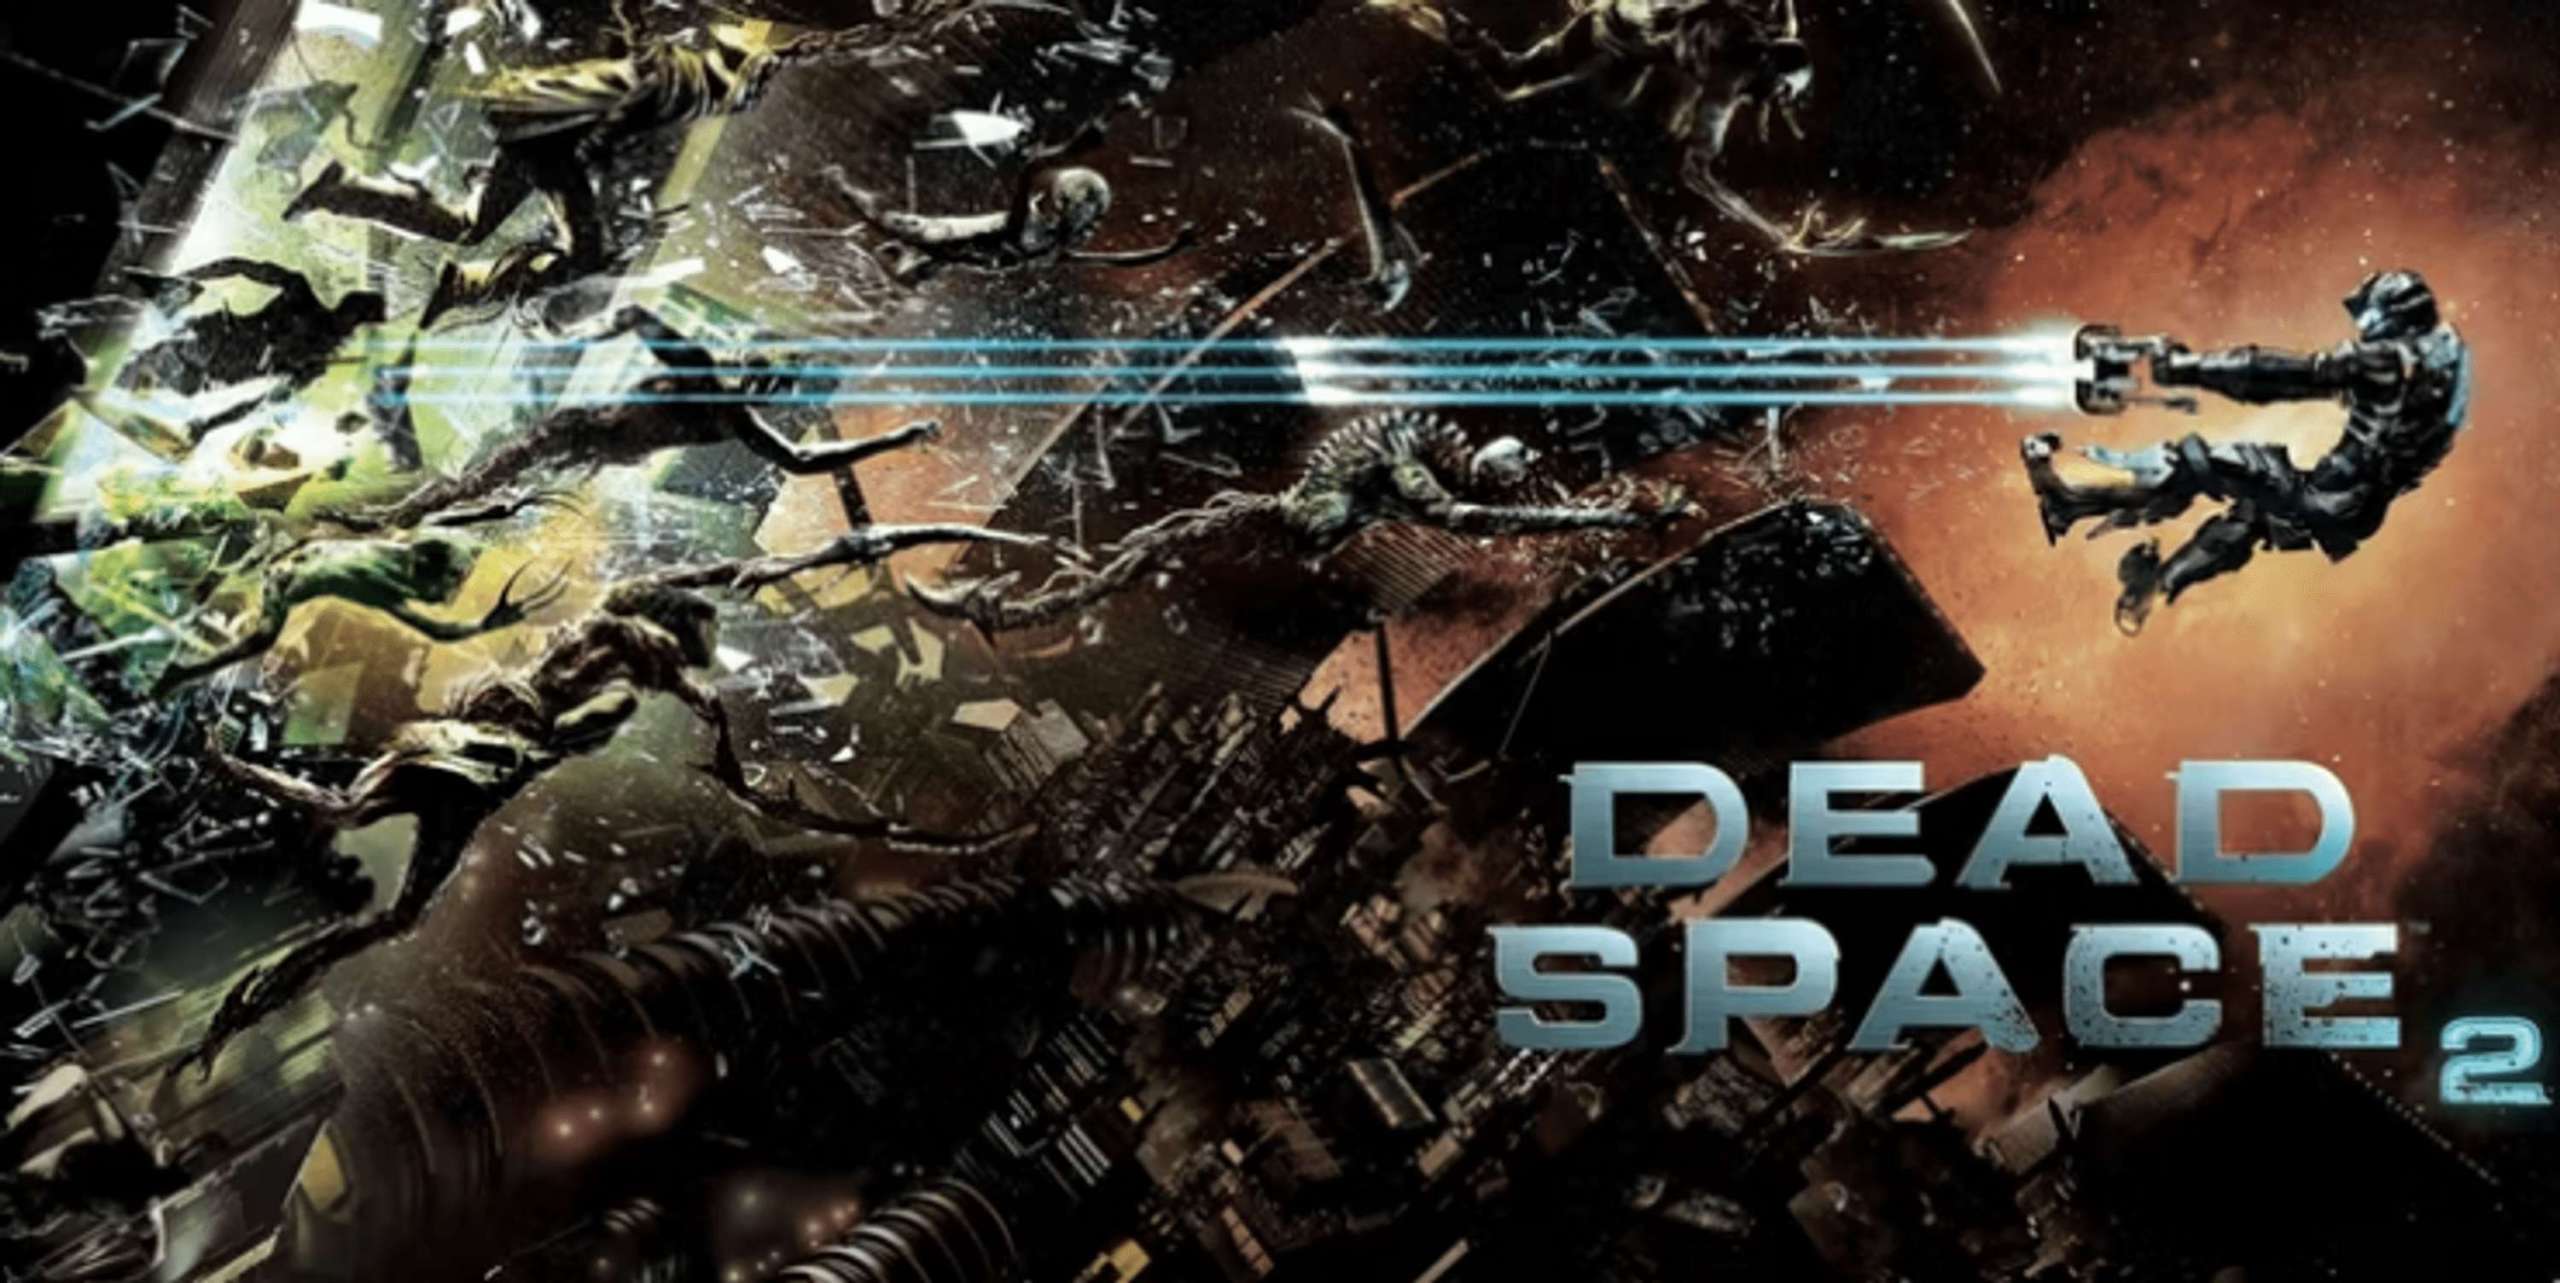 EA Motive Ought To Concentrate Its Efforts On Creating An Upgraded Version Of The Sequel Now That The Dead Space Remake Is So Fantastic-Looking